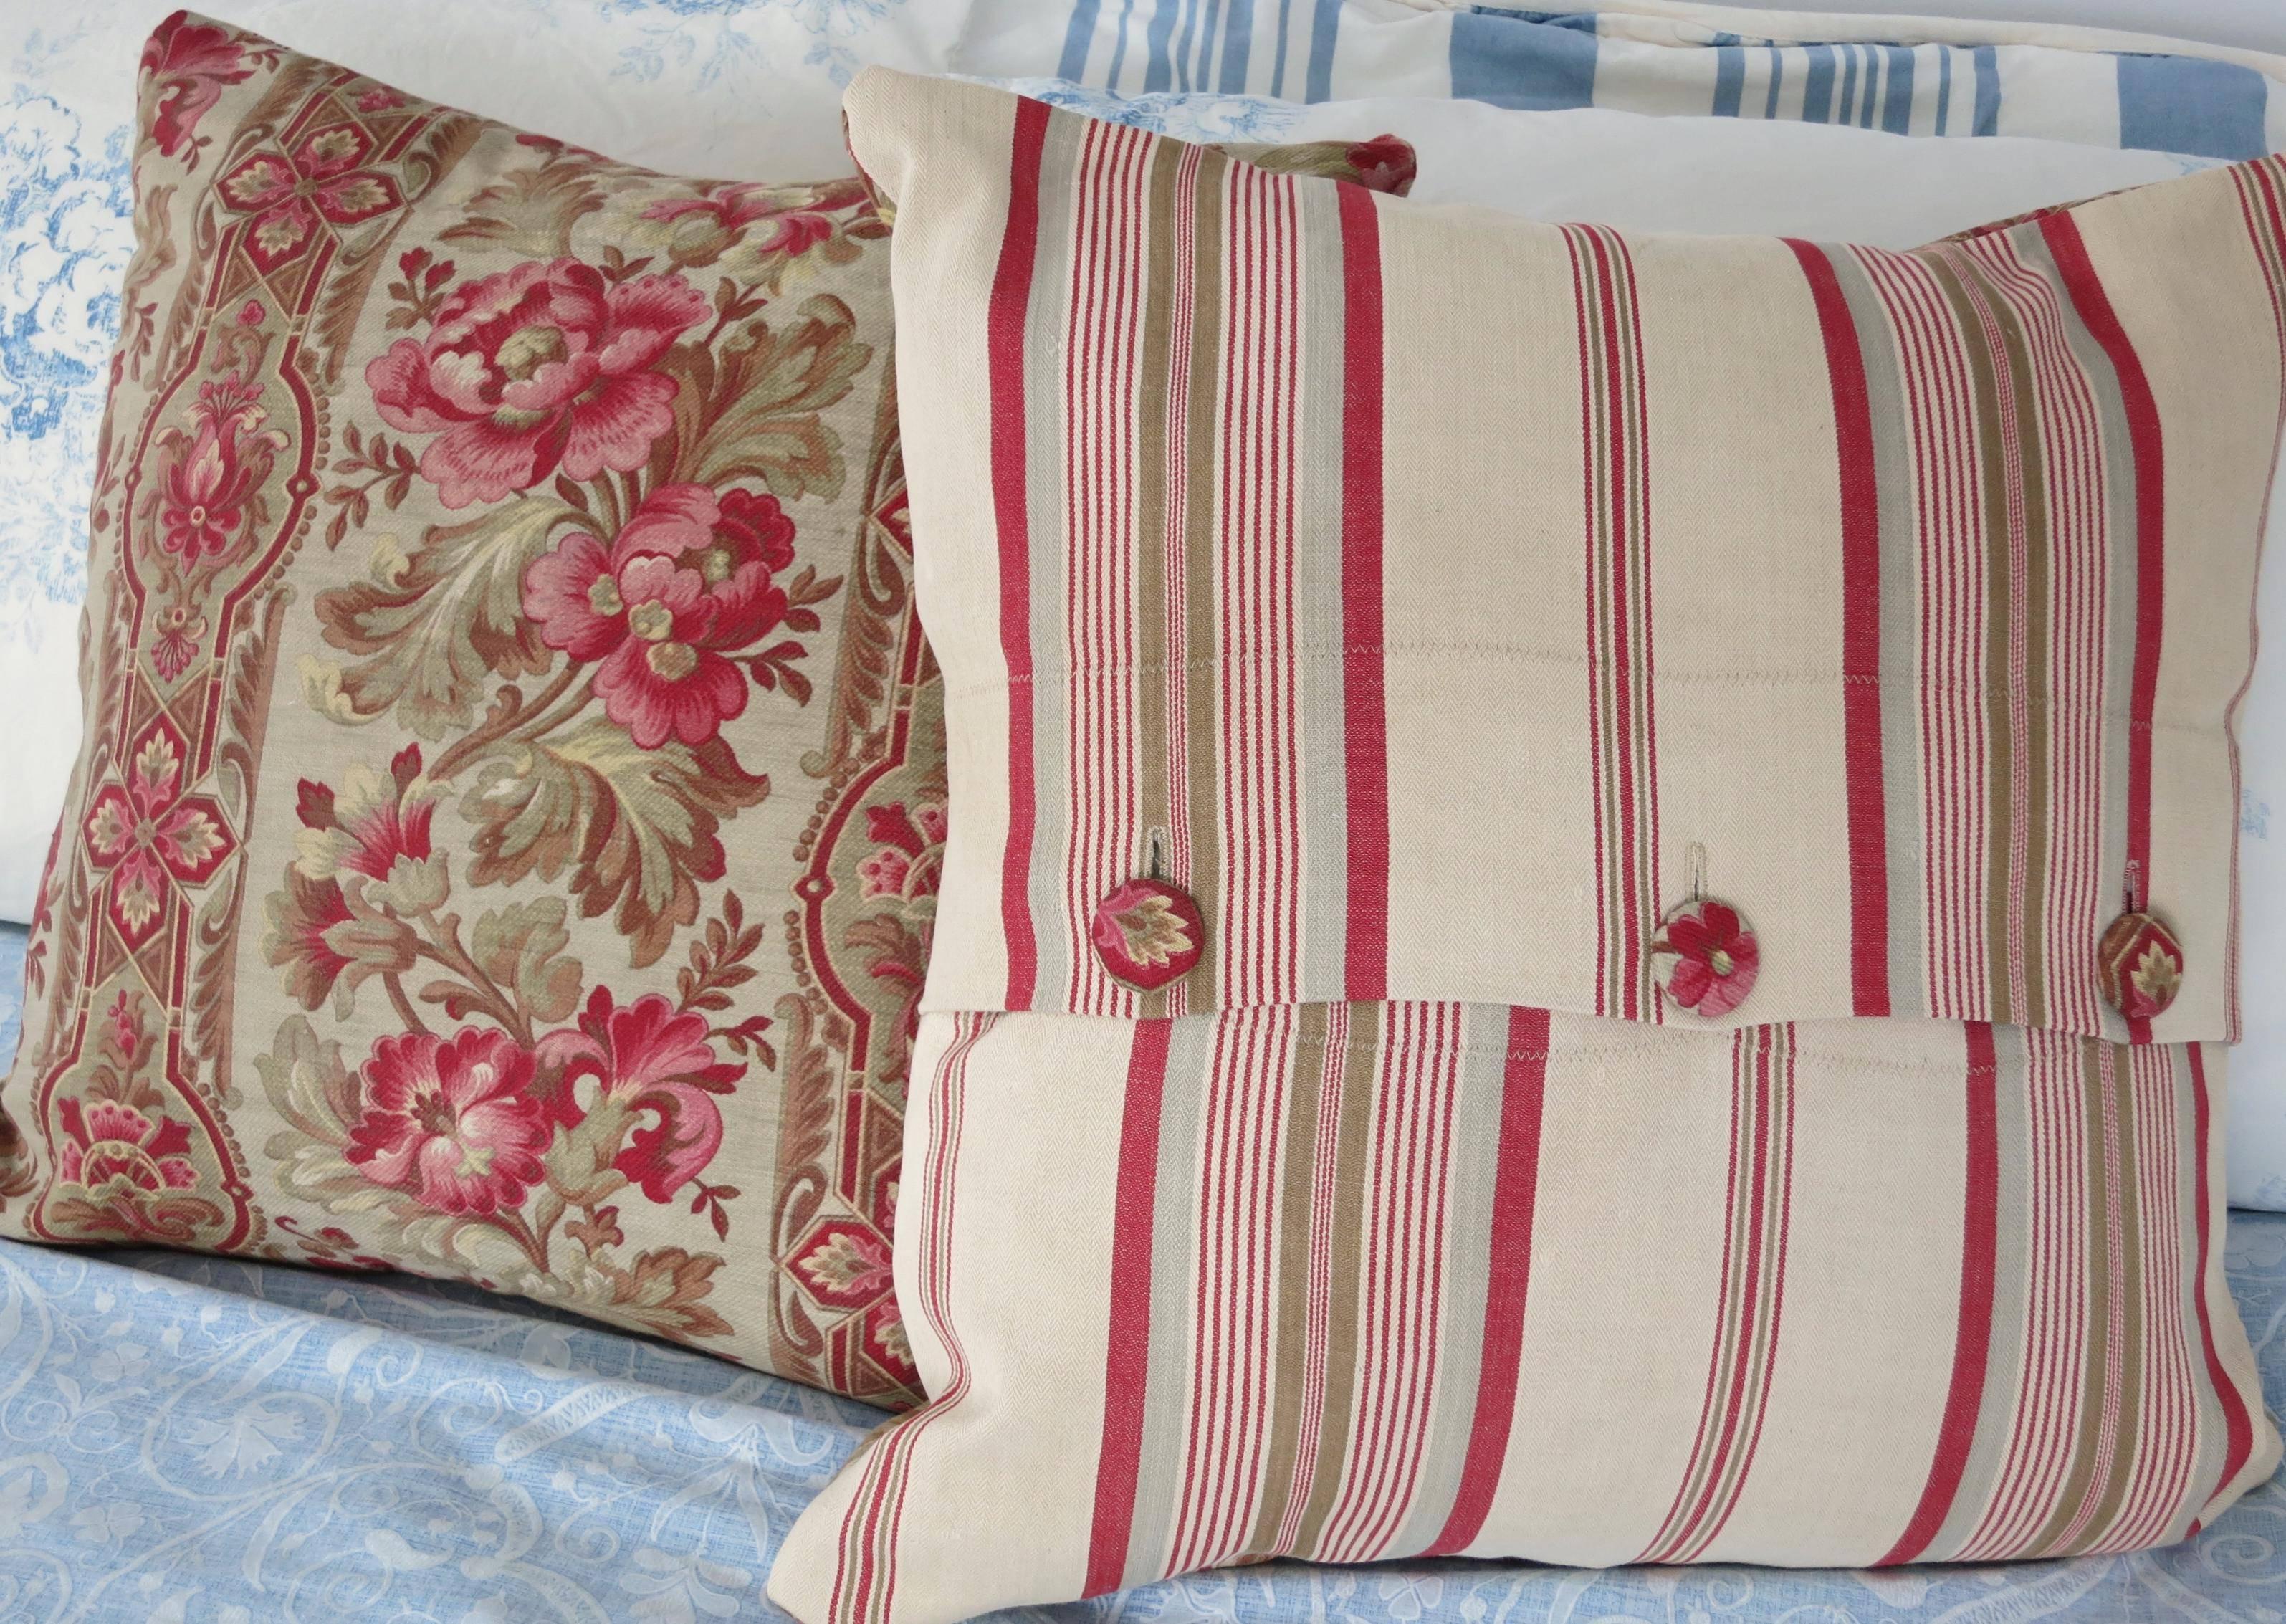 These gorgeous pillows features:

 The front: Lovely antique printed cotton cretonne dating from circa 1890. Truly outstanding and beautiful floral motif of warm earth tones and shades of pink and red.
 The back: A superb coordinating khaki, tan,